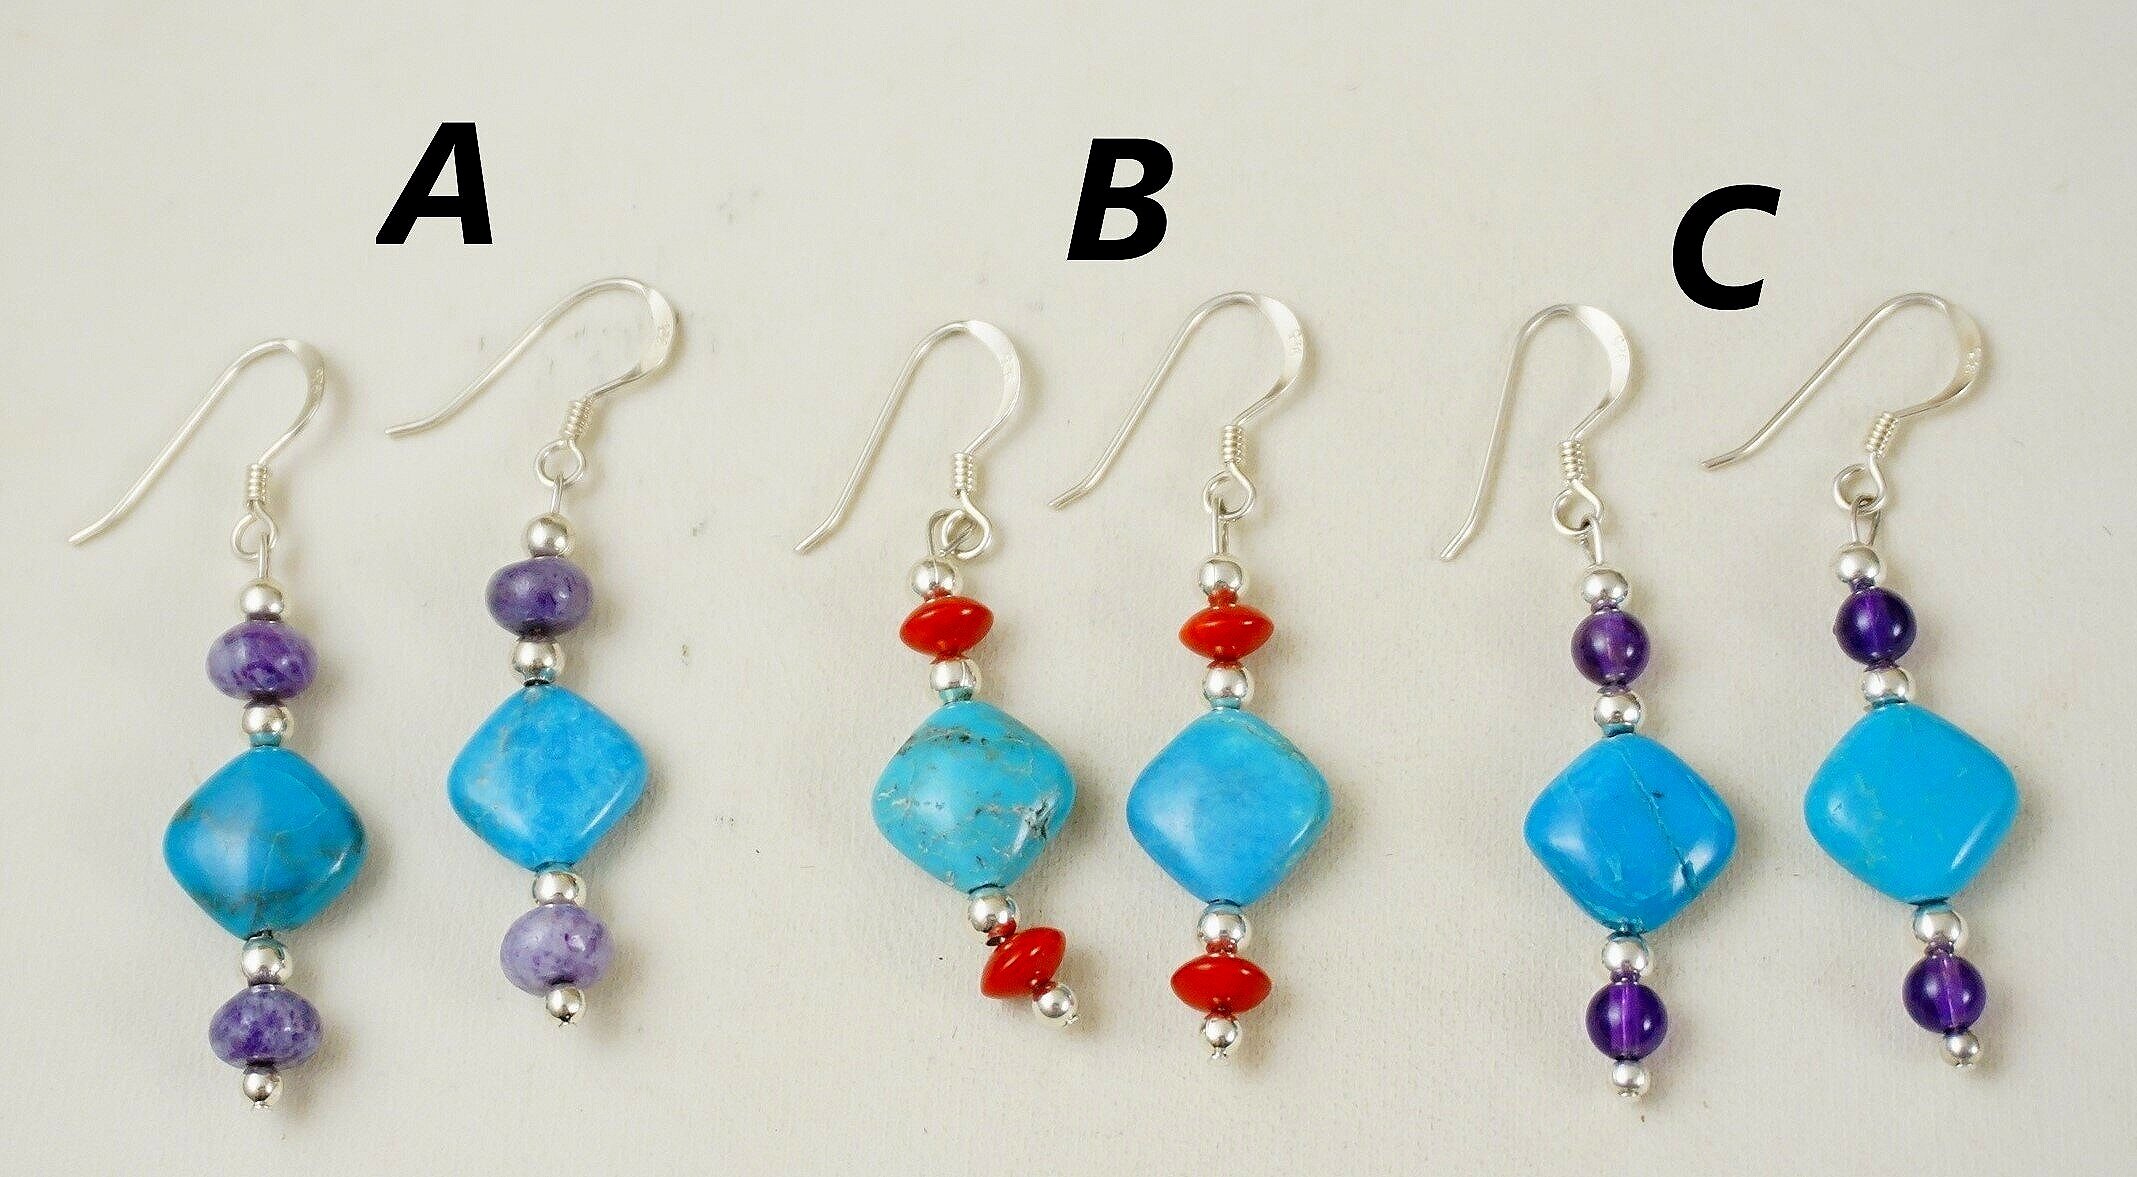 Wire Earrings · A Pair Of Beaded Earrings · Jewelry Making on Cut Out + Keep